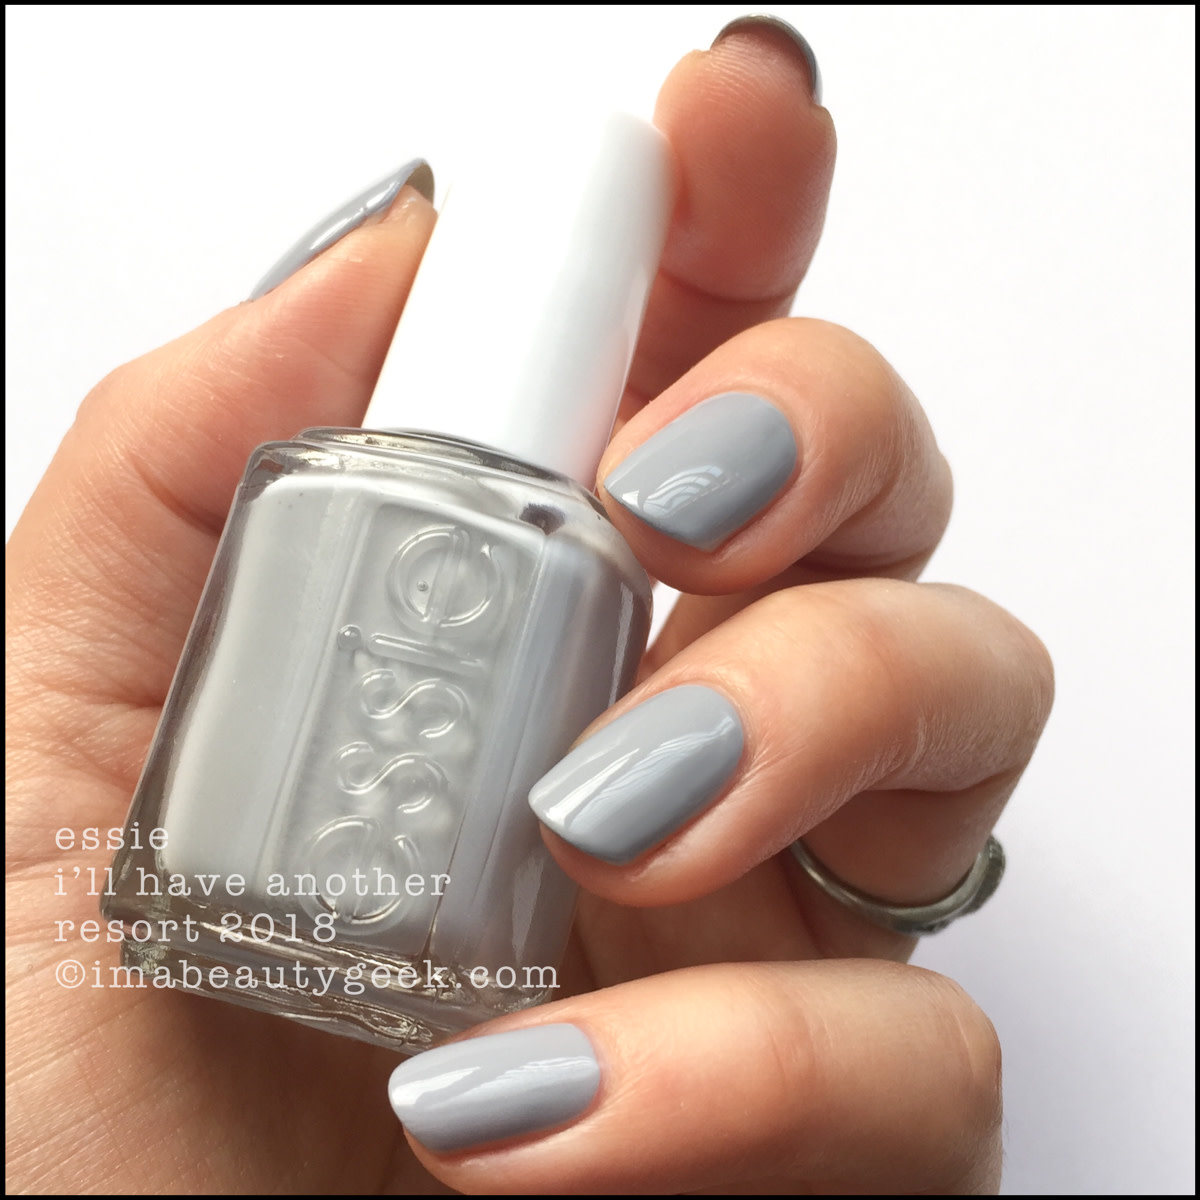 Essie I'll Have Another - Essie Resort 2018 Swatches Review